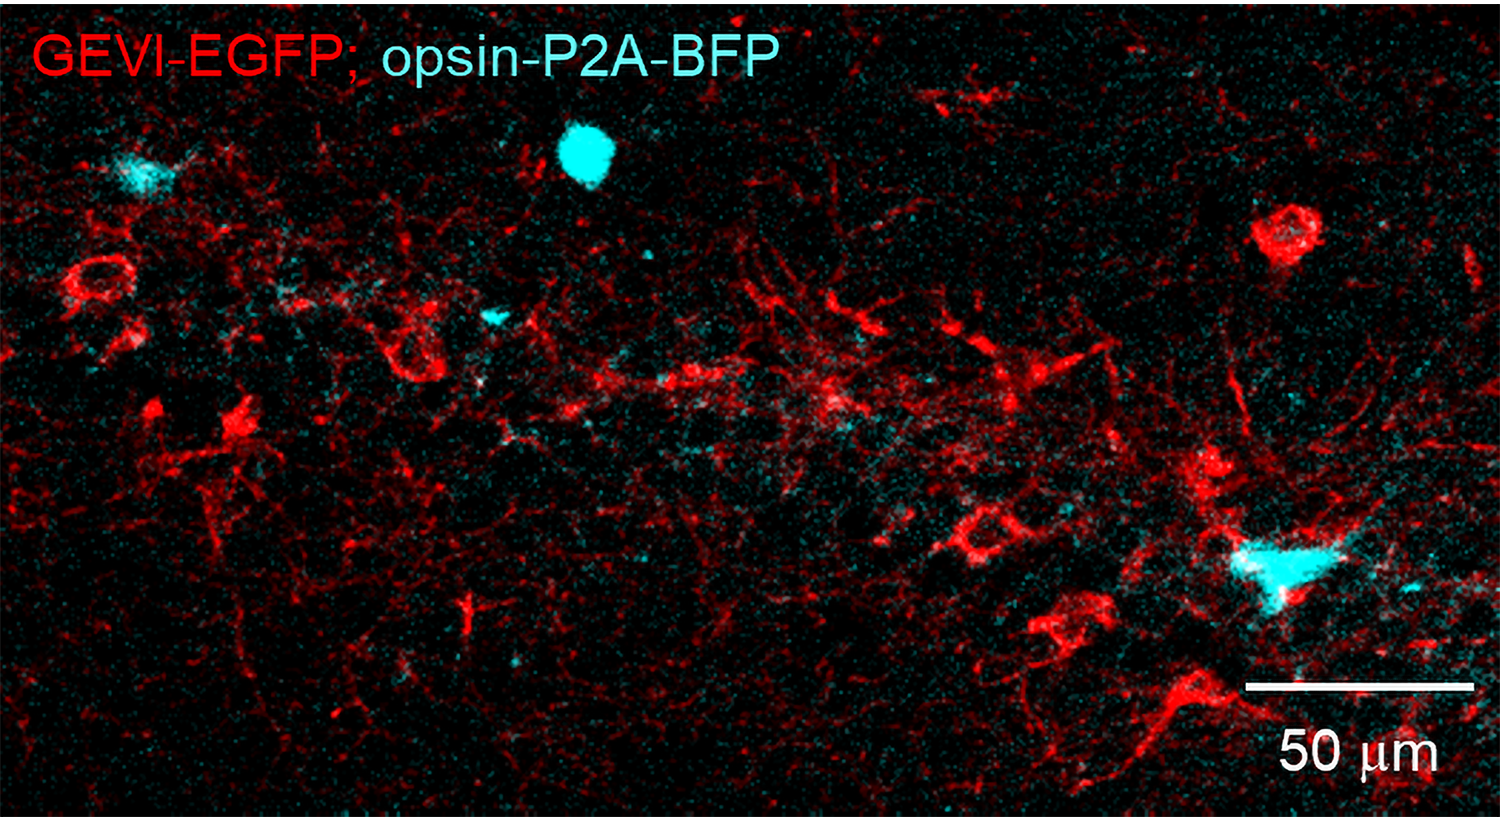 A stripe of red-colored neurons is accompanied by a few neurons in a contrasting cyan color